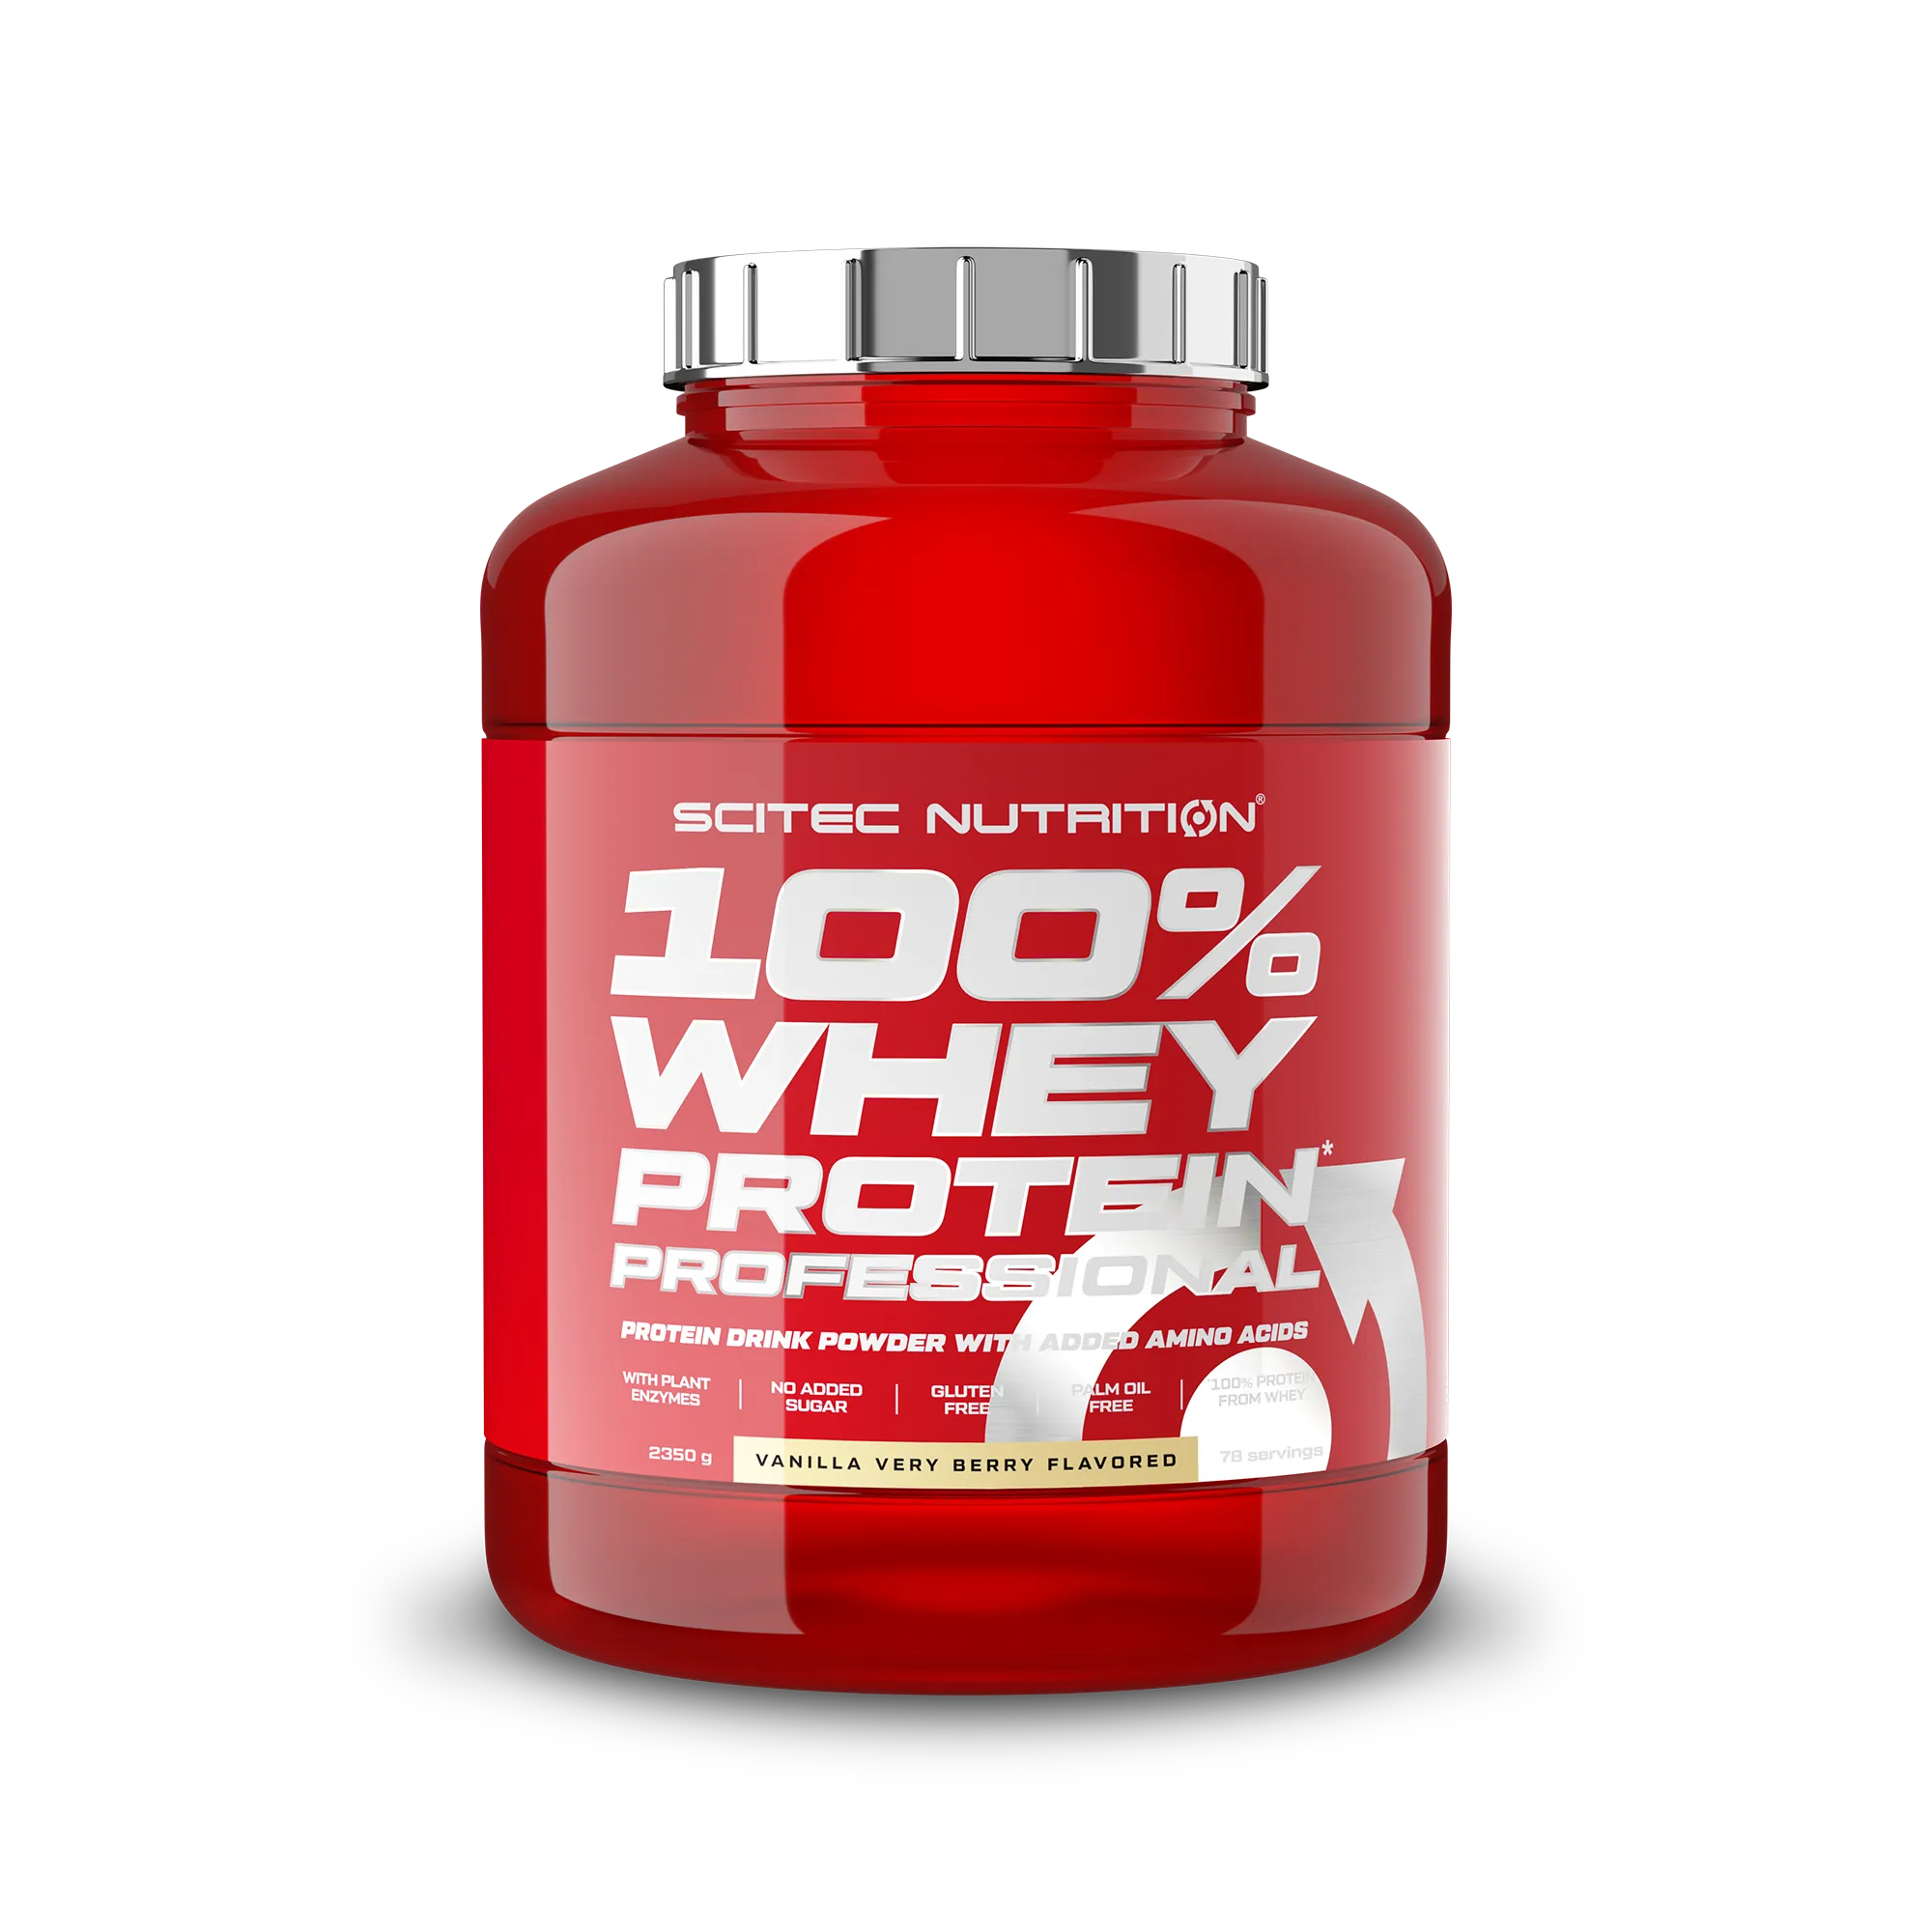 Scitec Nutrition 100% Whey Protein Professional vanilka very berry